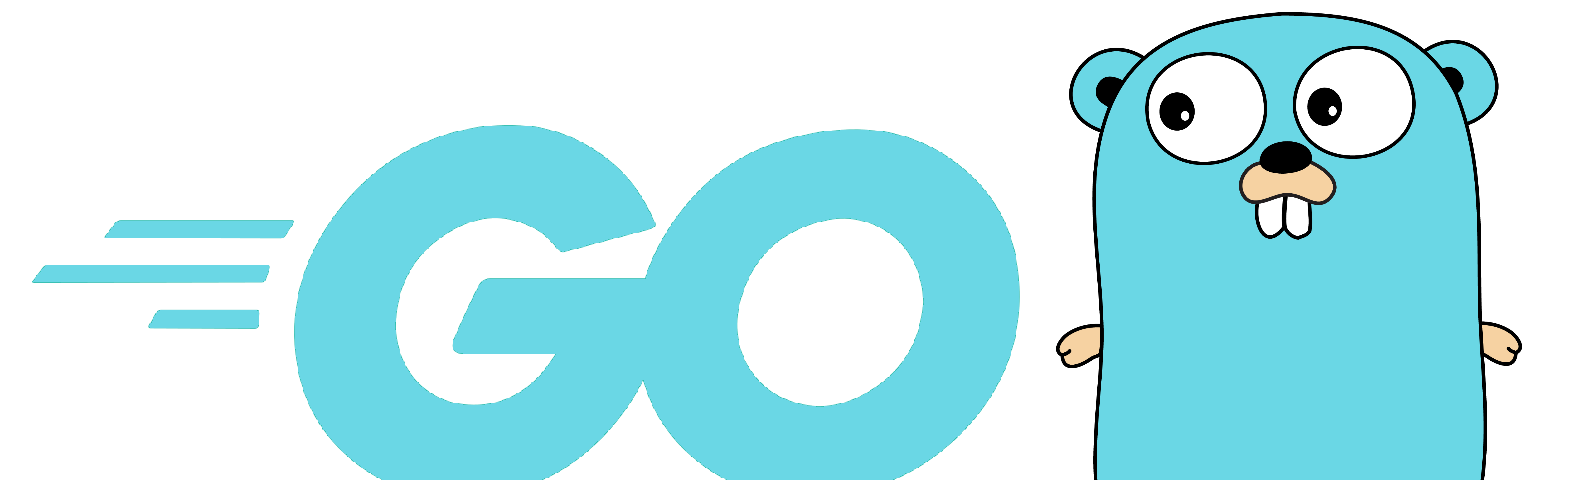 Image of the logo for Go language